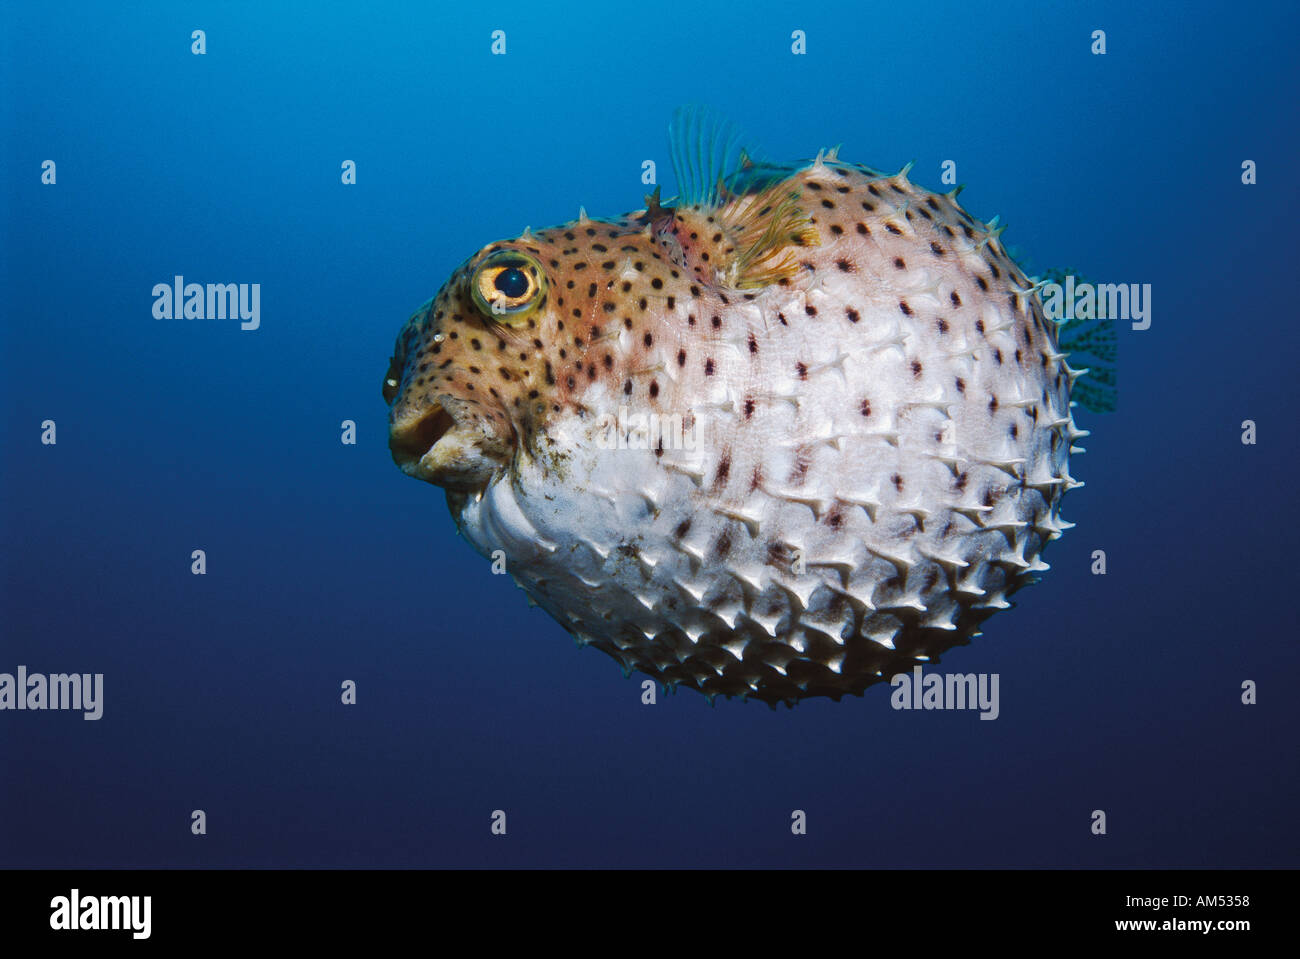 Inflated porcupinefish in open sea attempts to scare away a predator - liturosus diodontidae Stock Photo